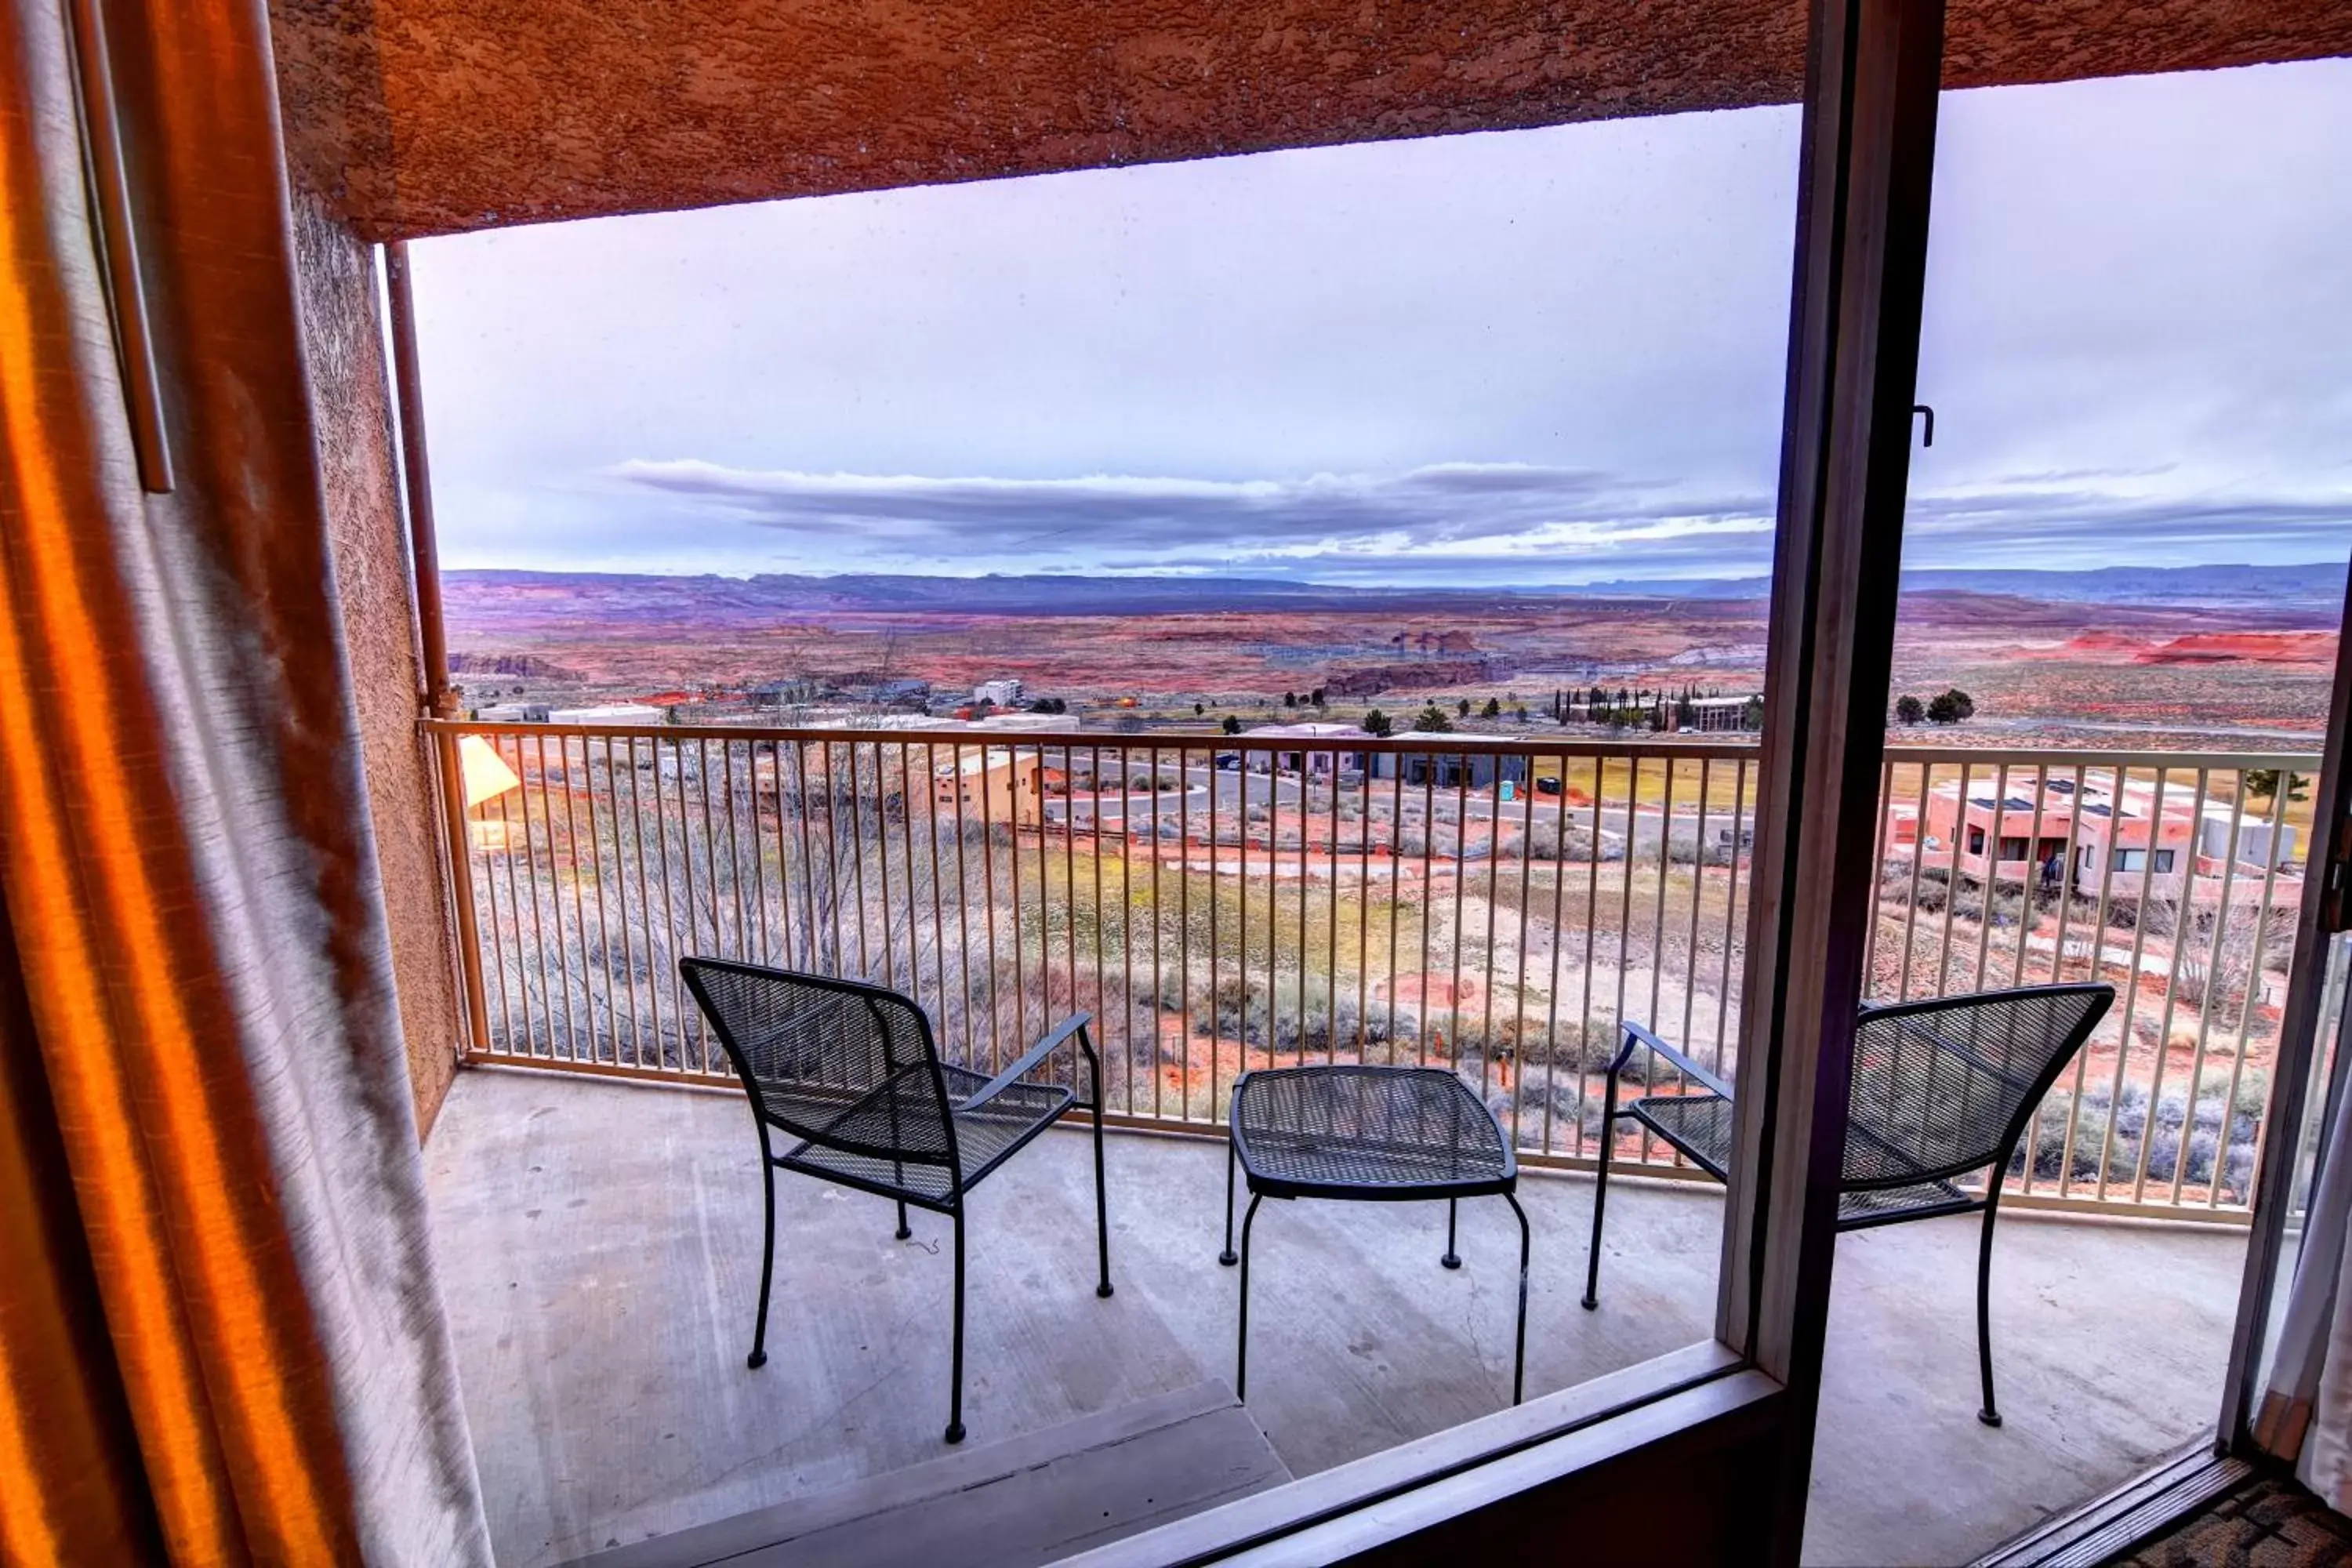 Standard Queen Room with Two Queen Beds and Balcony - Non-Smoking/Moutain View/No Pets Allowed in Quality Inn View of Lake Powell – Page